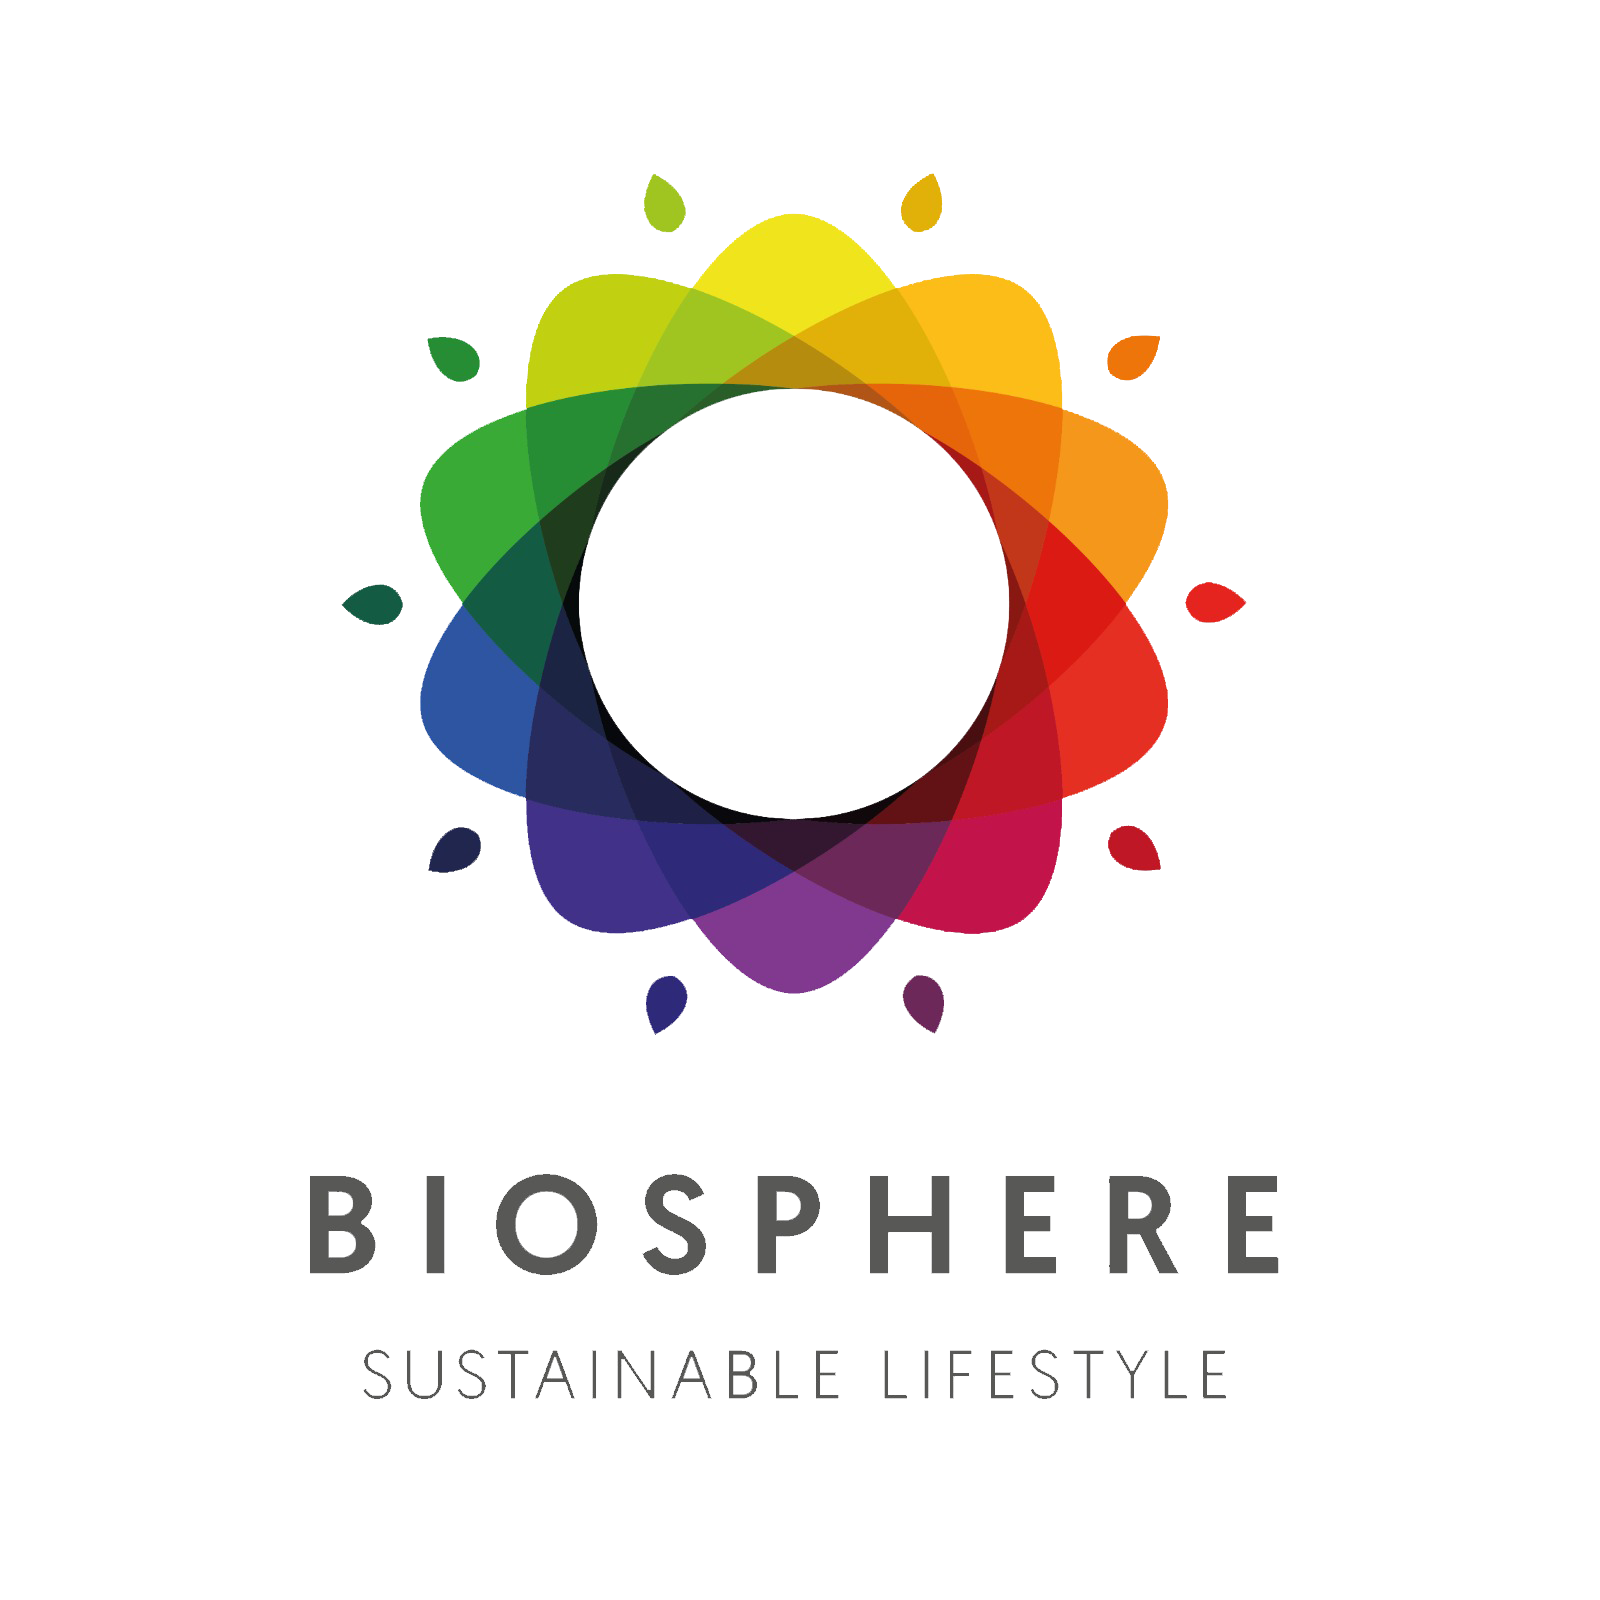 The RoseGarden House has the Biosphere sustainability certification